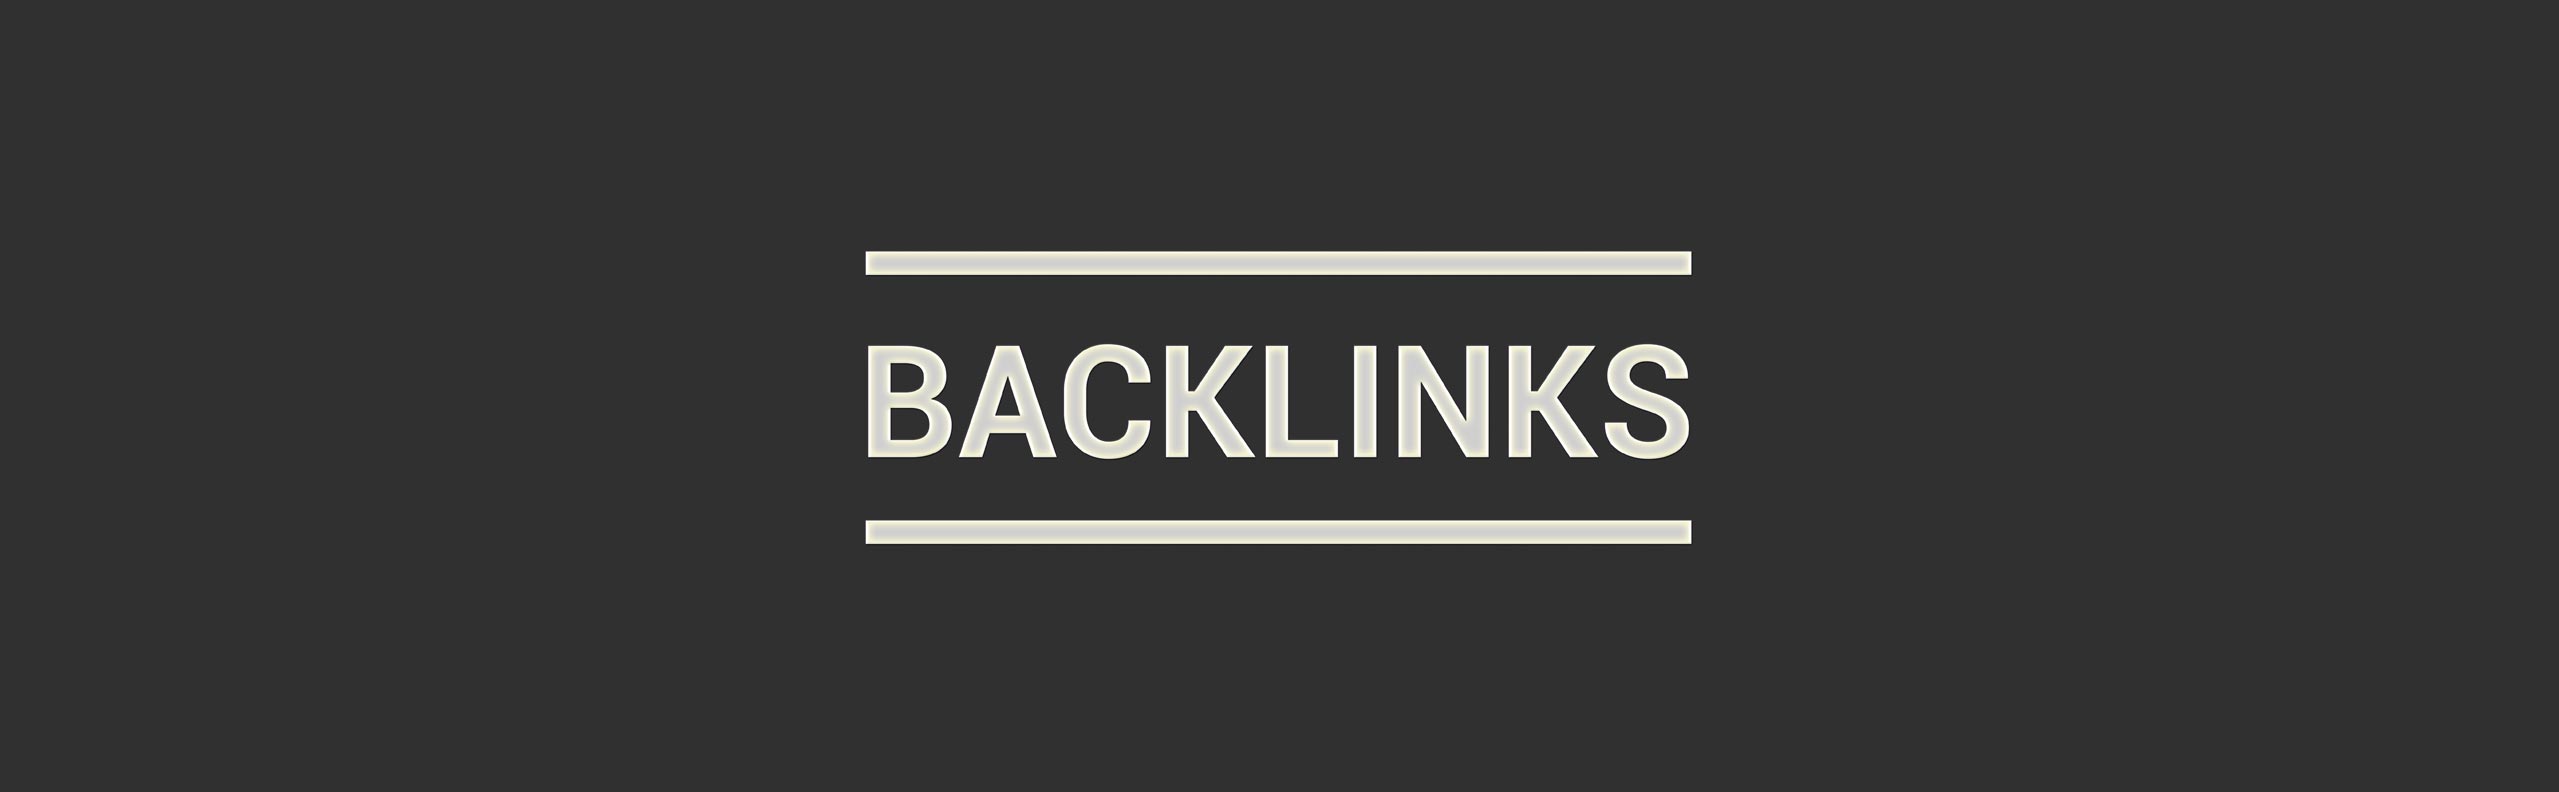 How Can the Dofollow Backlink Help Your Website?